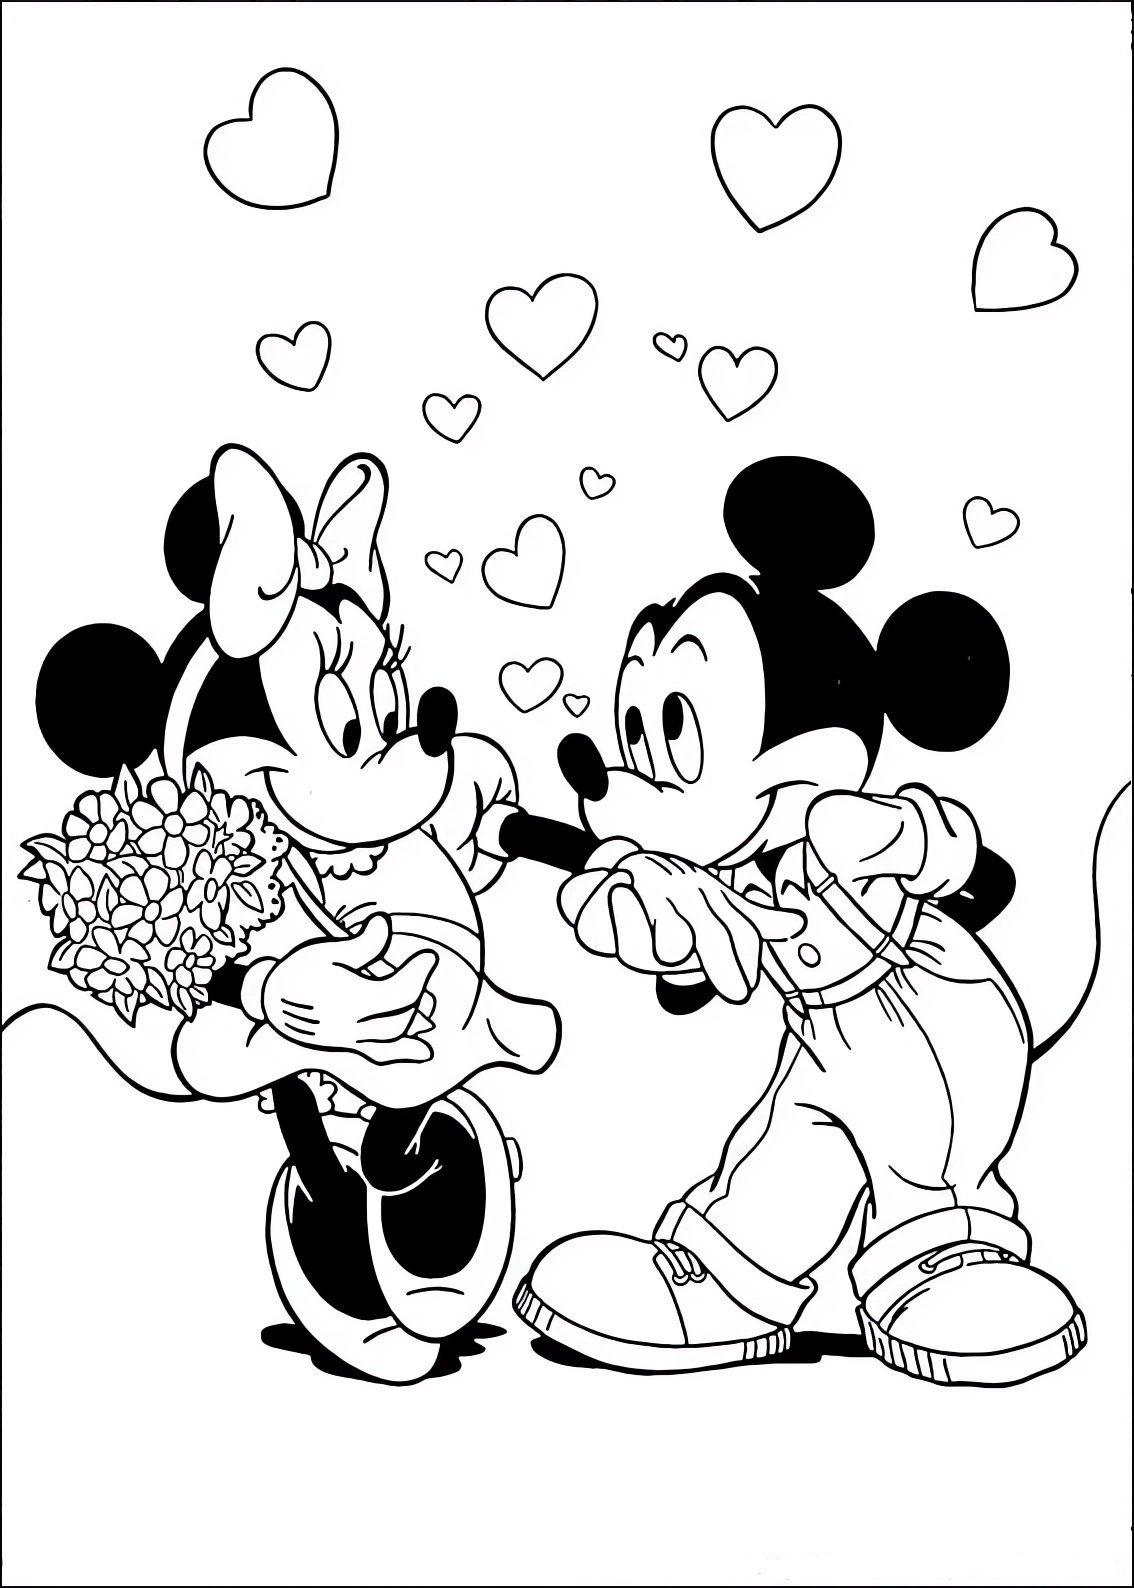 Coloring page of Minnie and Mickey Mouse (Mickey Mouse) in love with a bouquet of flowers